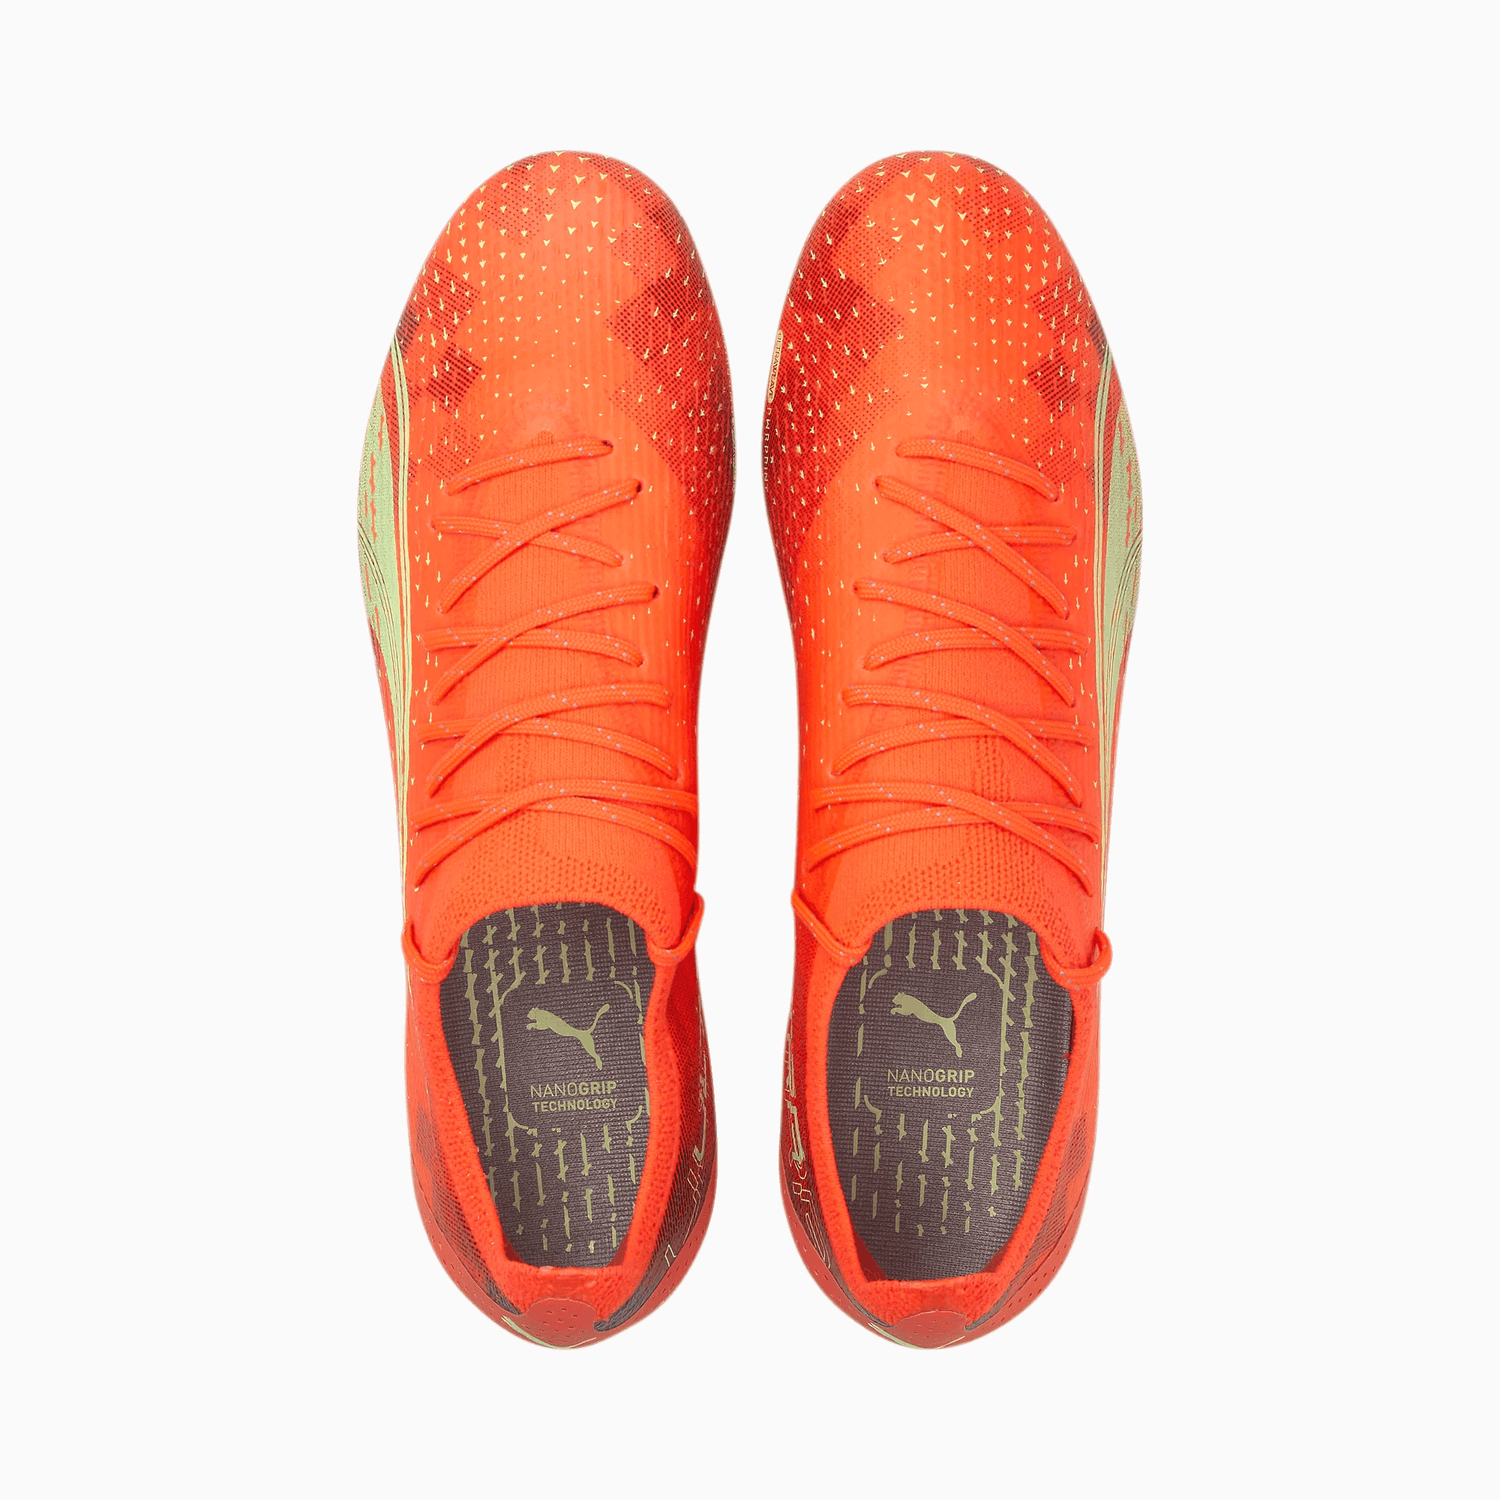 Puma Ultra Ultimate FG/AG - Coral-Fizzy Light (Pair - Top)